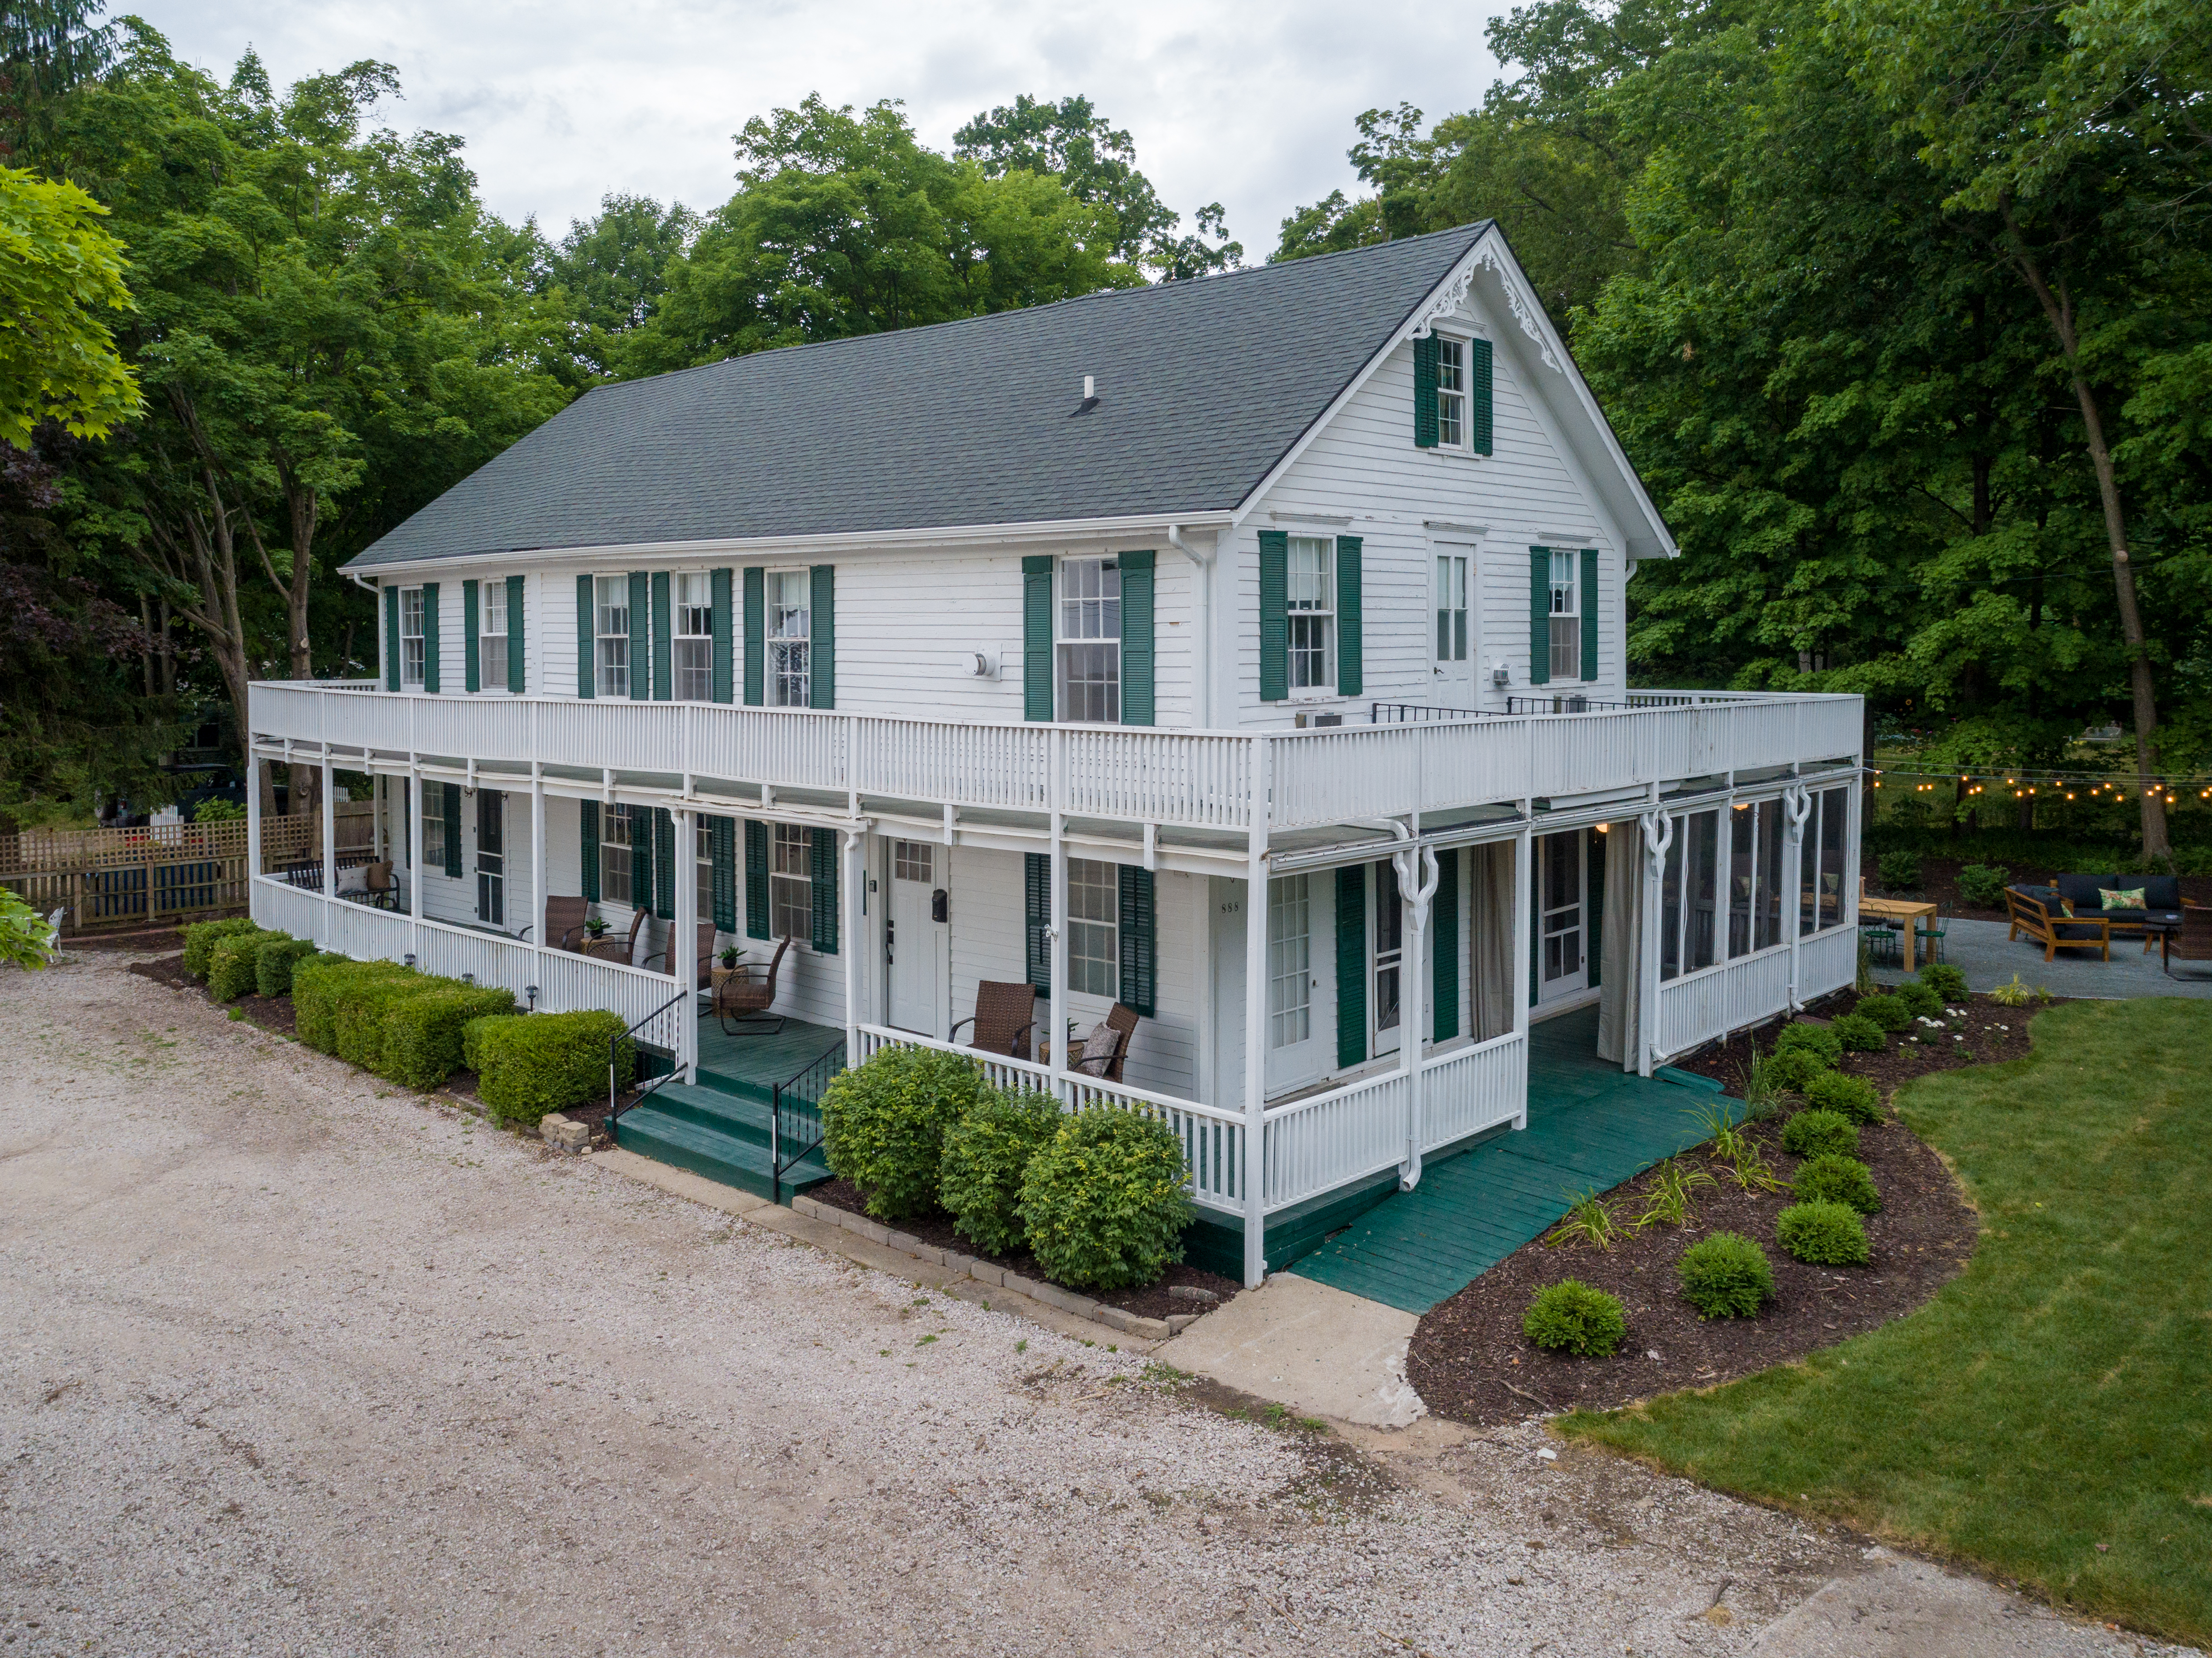 This eight-bedroom, nine-bathroom cottage boasts a gorgeous wraparound porch and outdoor custom patio.